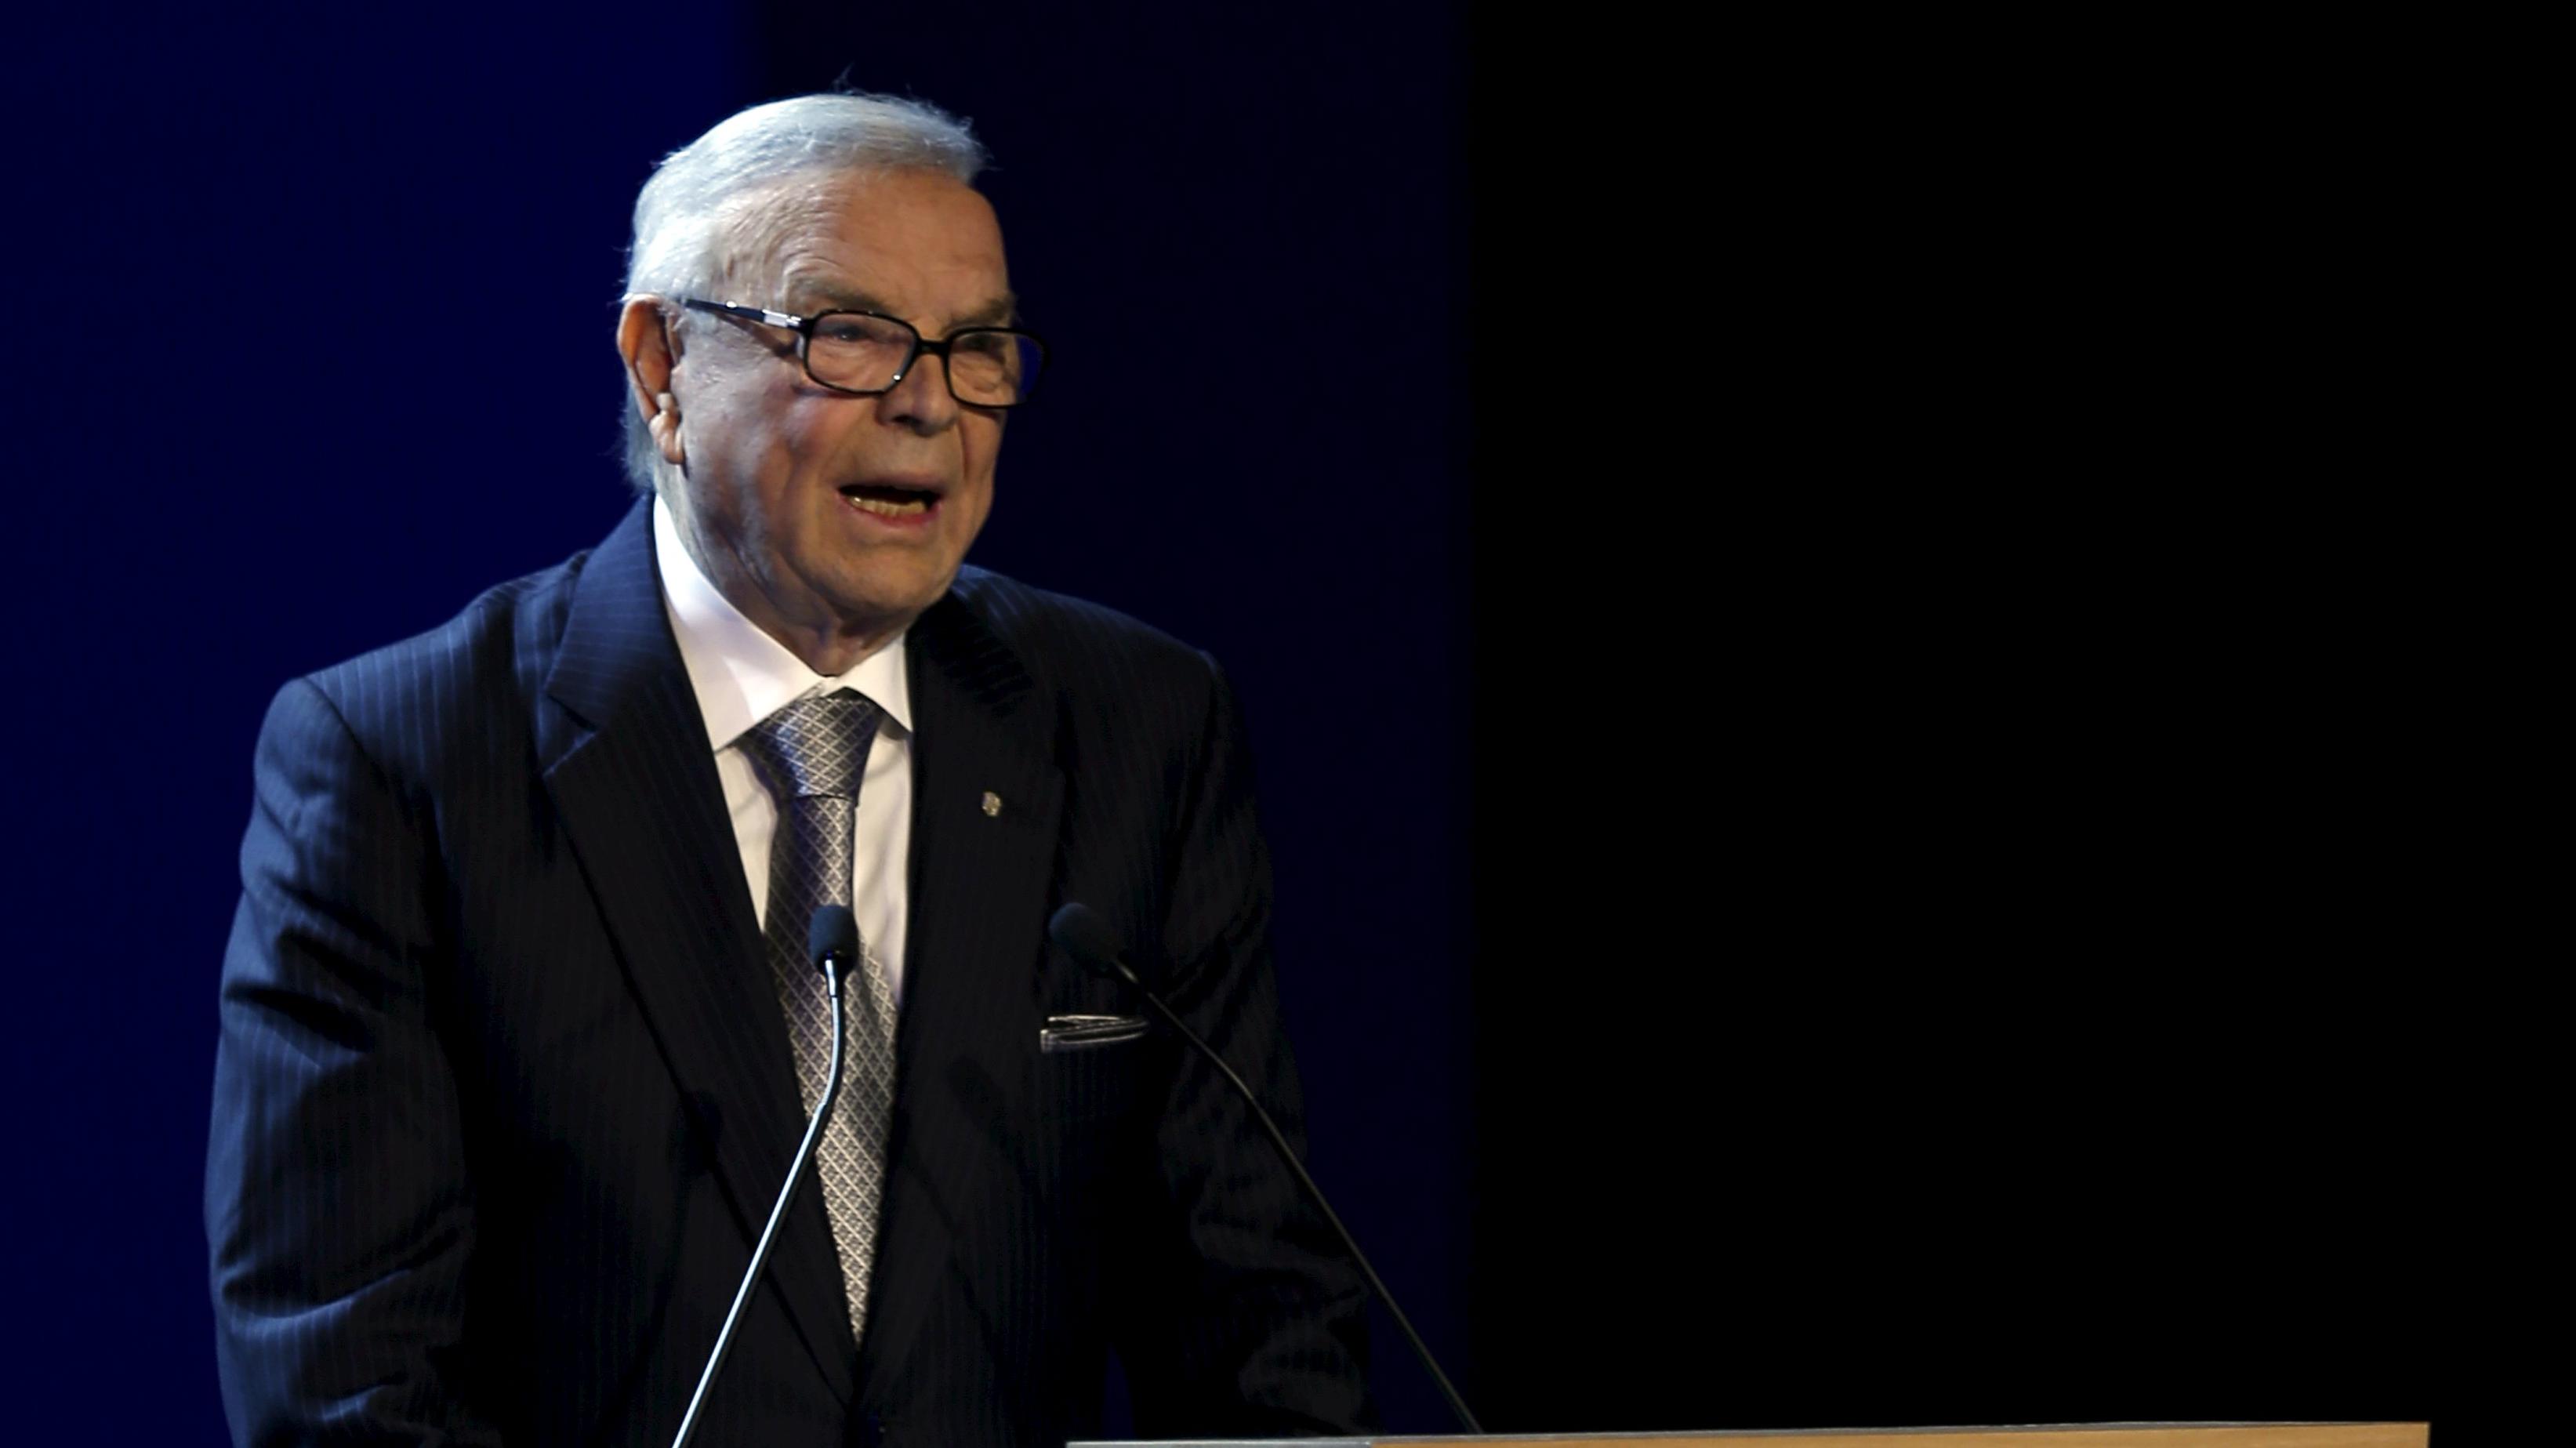 File photo of Marin, then-president of Brazilian Football Confederation, delivering a speech during the opening ceremony of the 65th FIFA Congress in Sao Paulo.